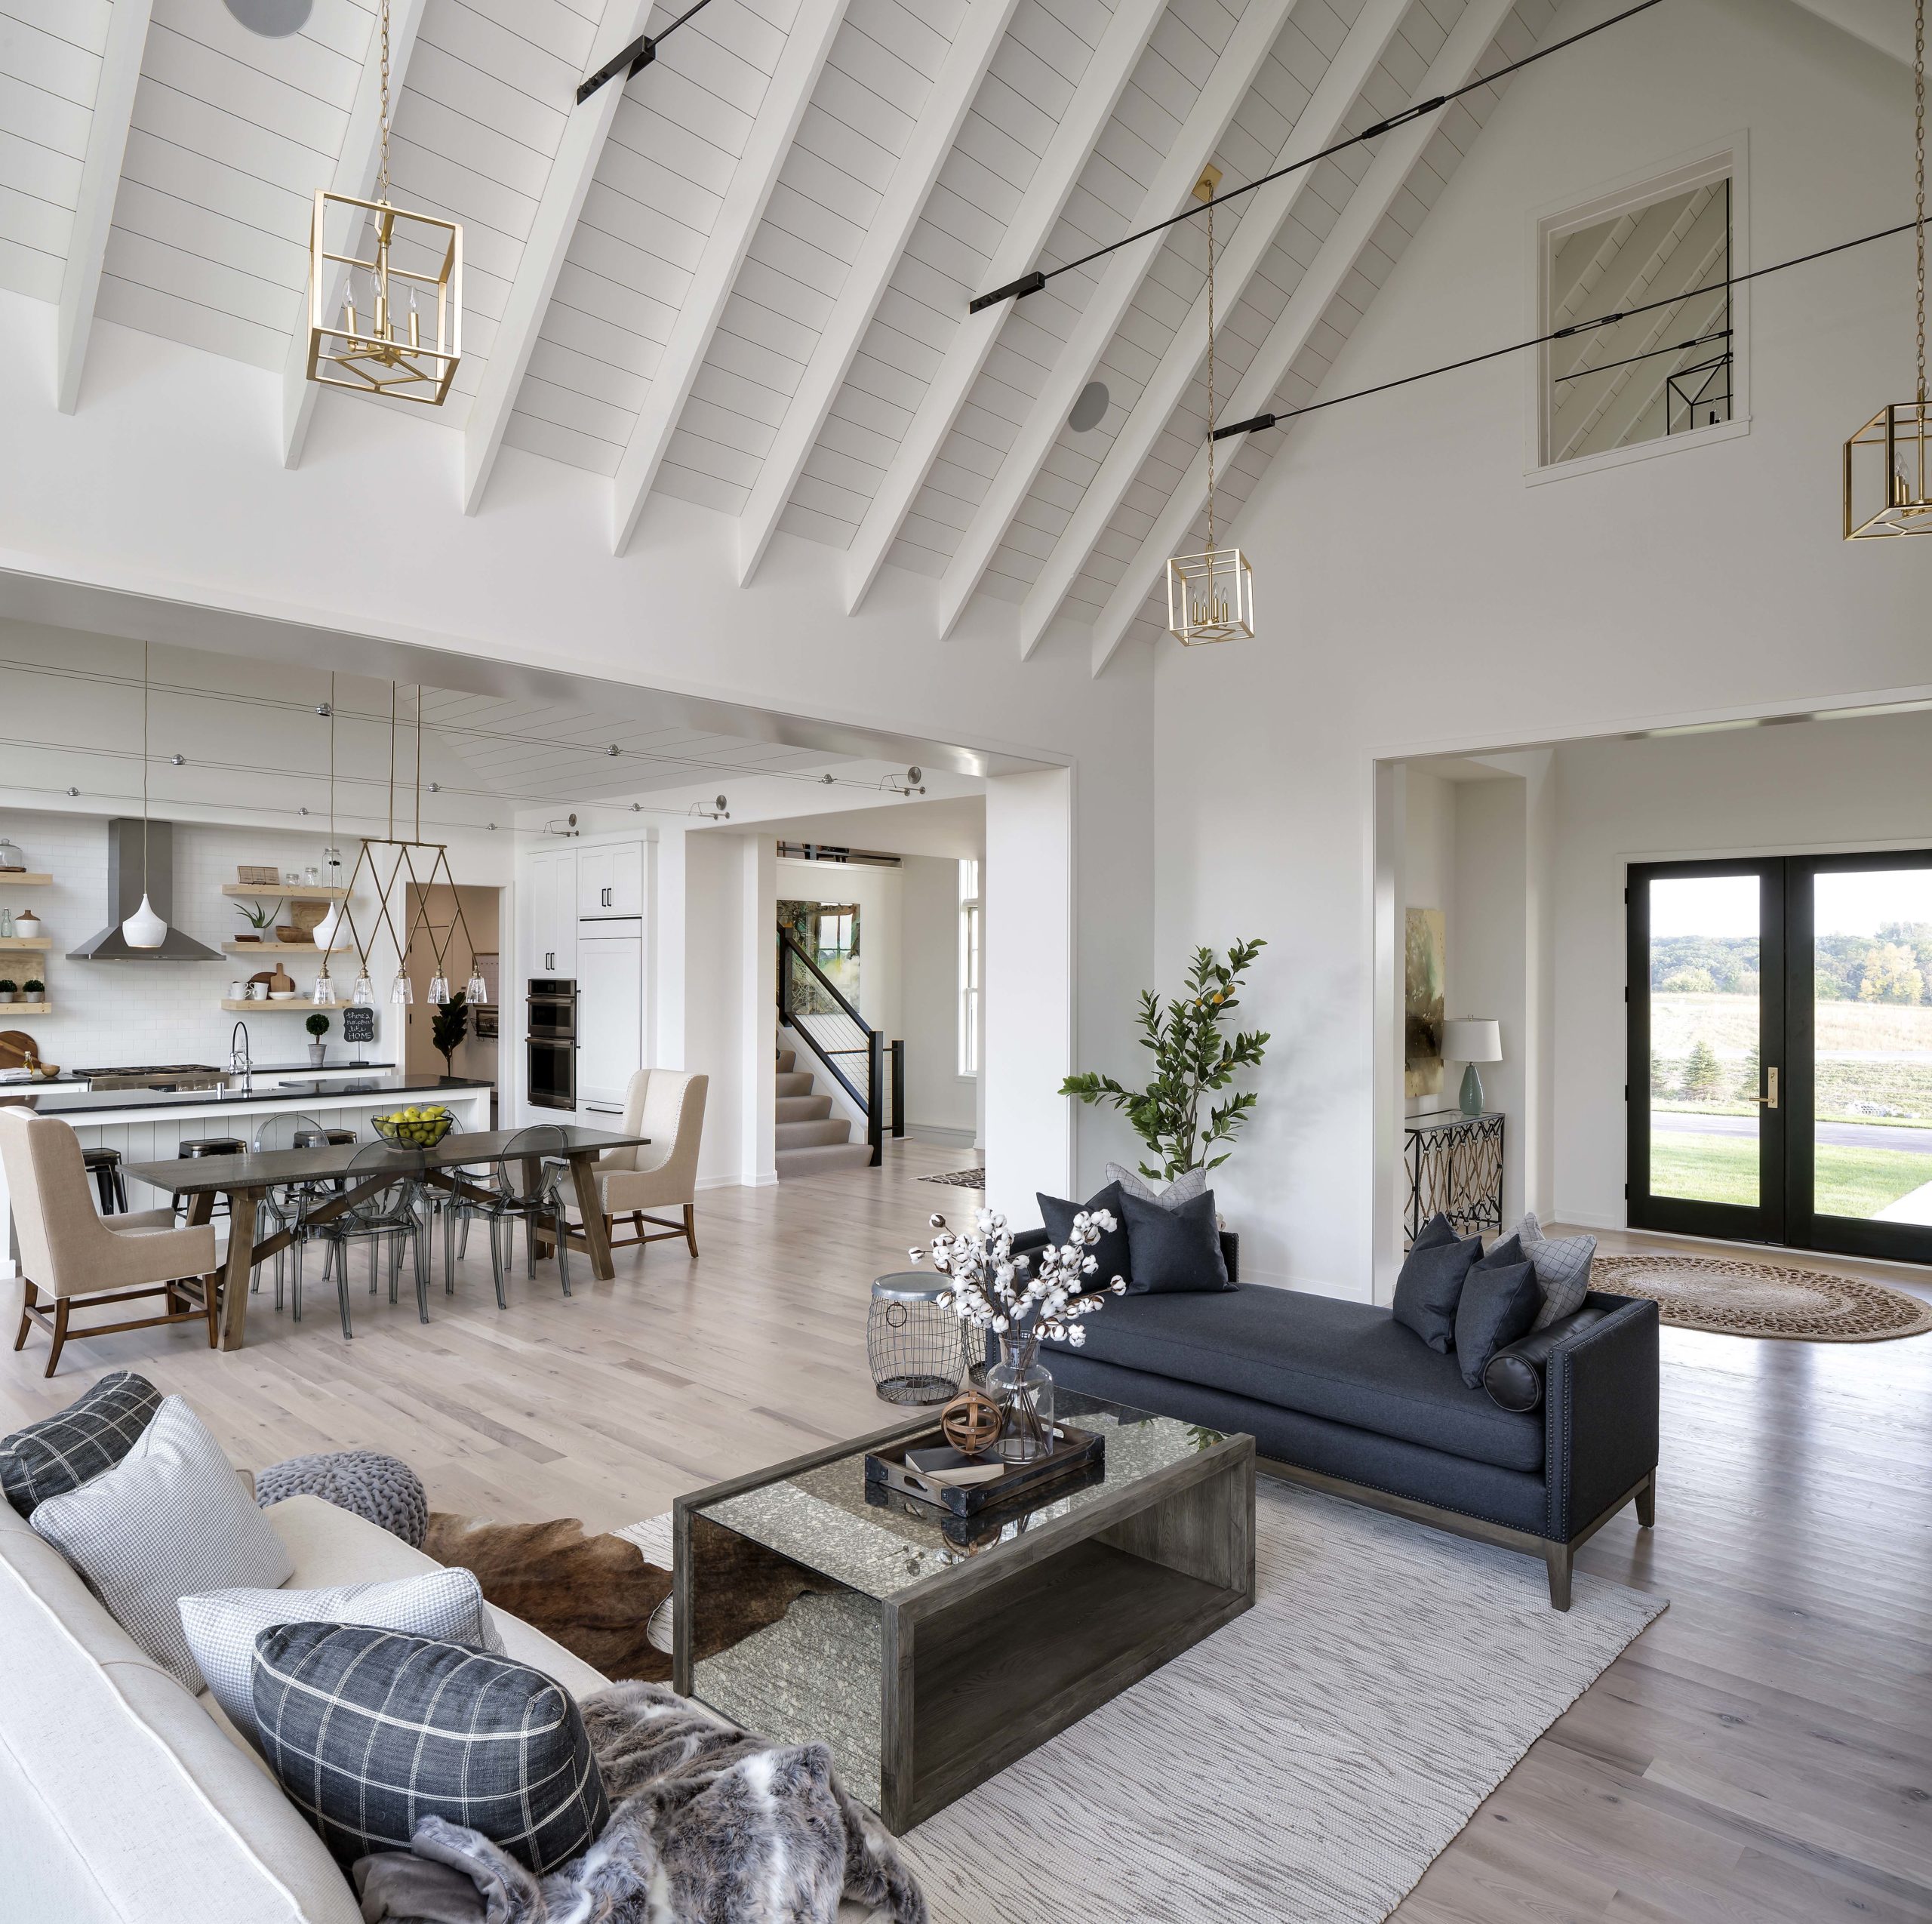 A living room with a vaulted ceiling and hardwood floors in a farmhouse style with reverence.